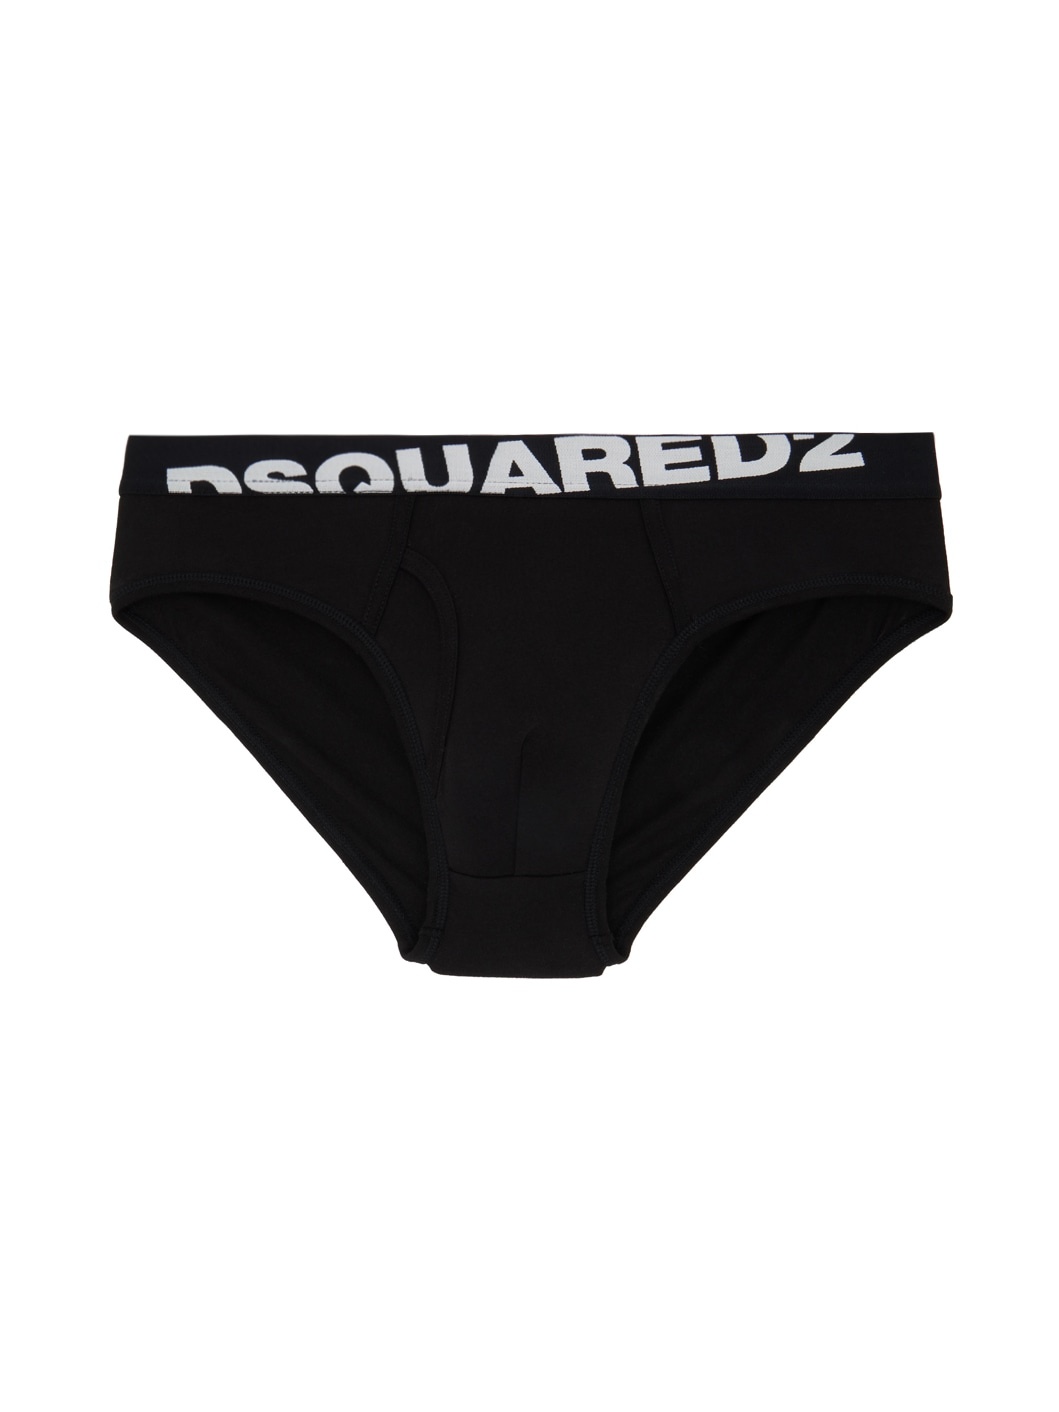 Two-Pack Black Briefs - 2